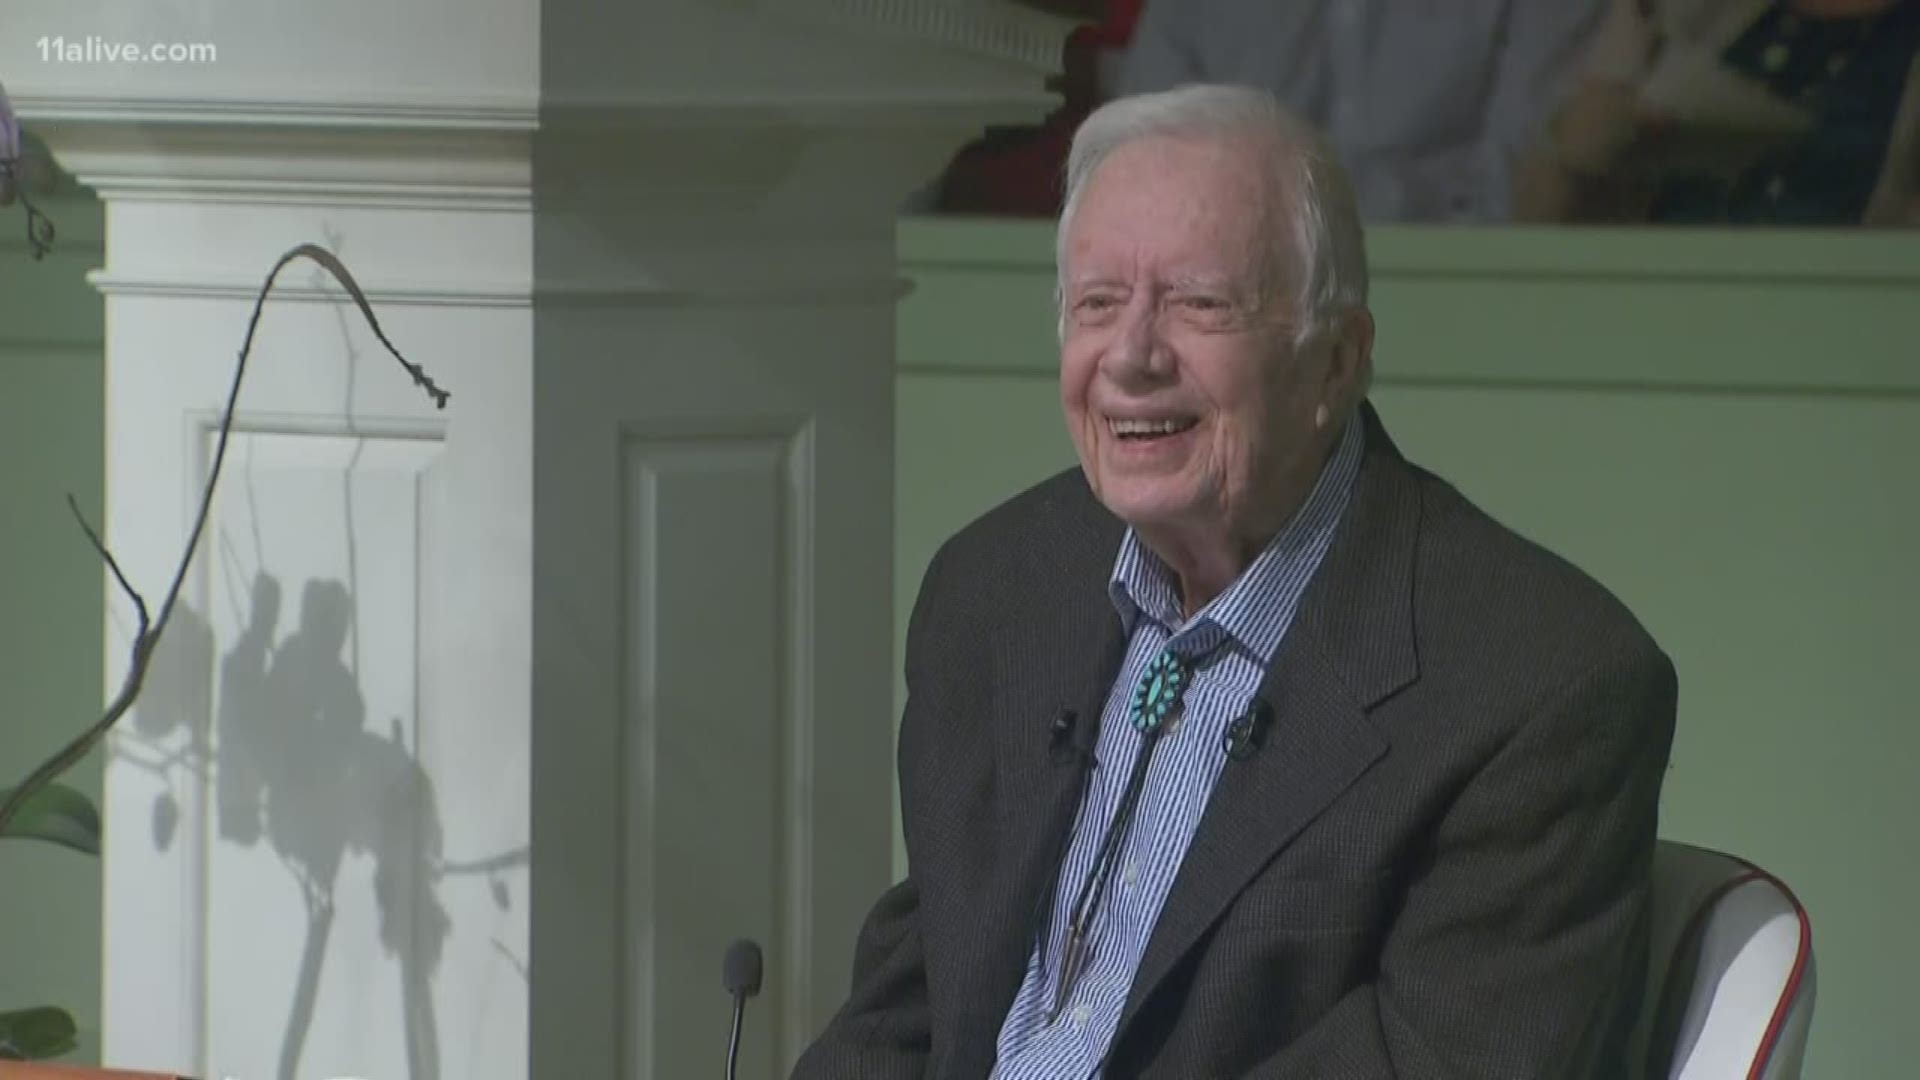 Former President Jimmy Carter returned to his regular spot at the head of his weekly Sunday School class this week. He normally teaches class at Maranatha Baptist Church in Plains, Ga., every Sunday morning, when his health and travels permit.